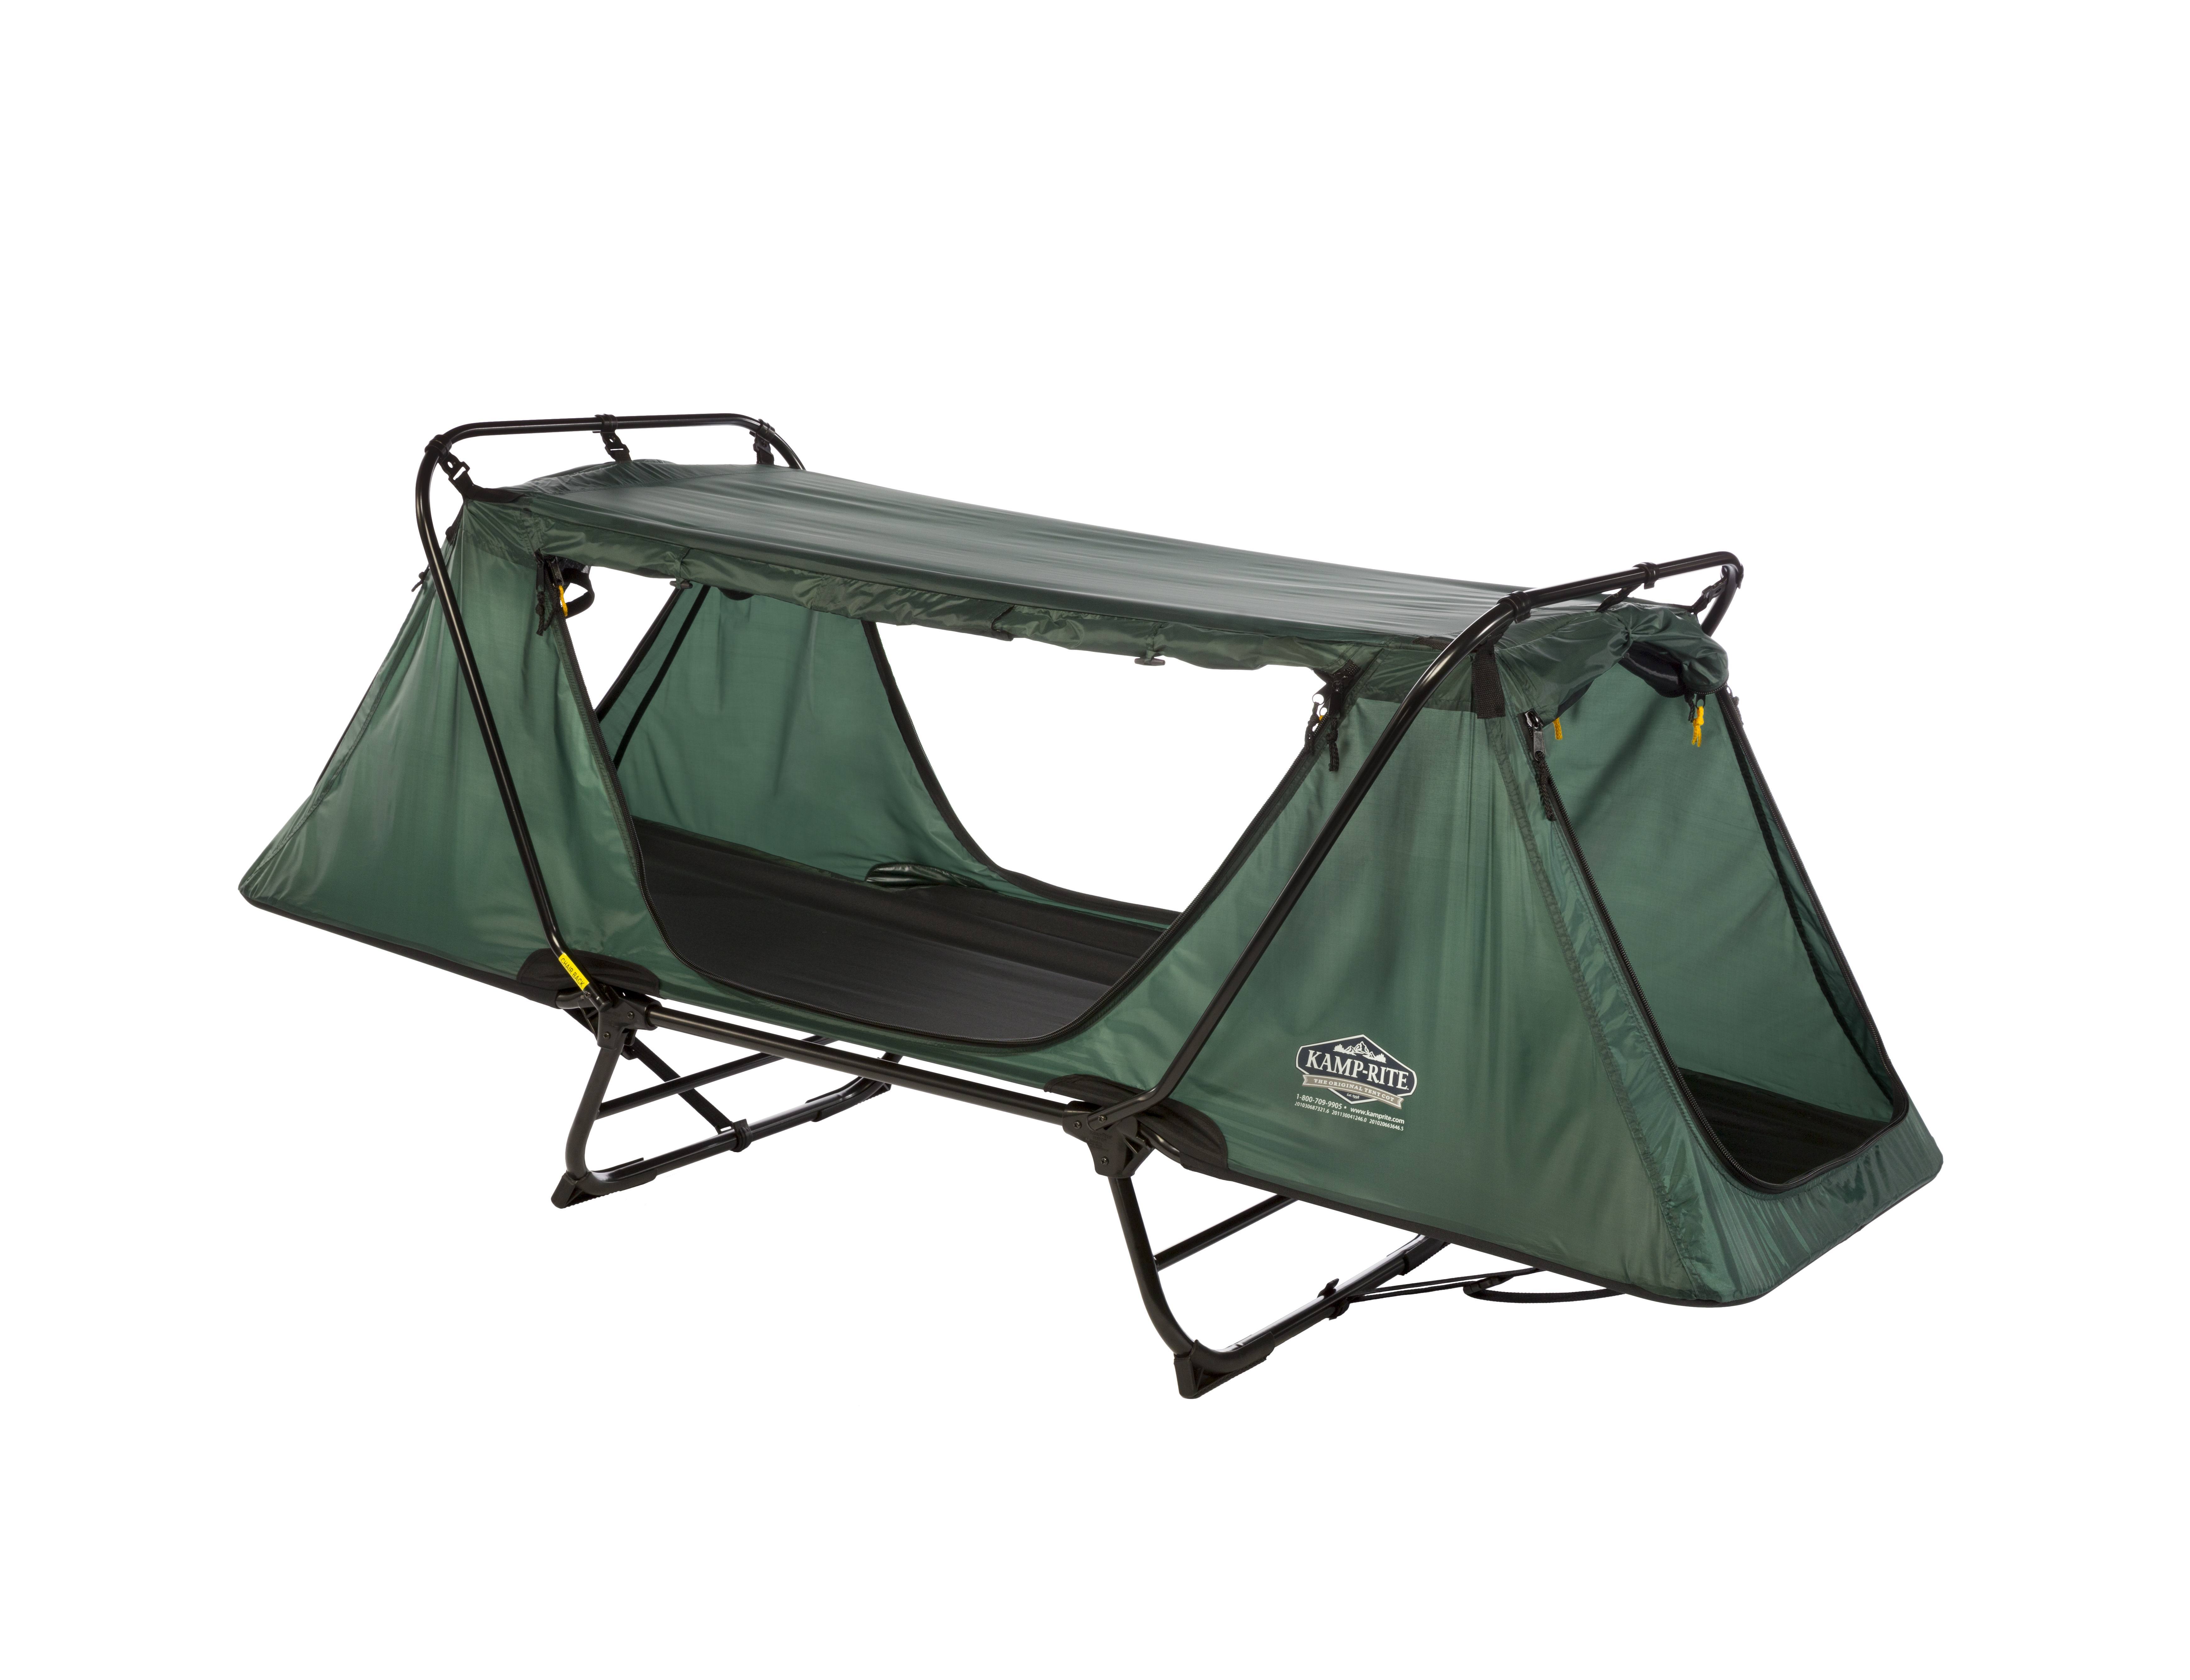 TENT COT FOLDING CAMP COT FOLD-OUT COTSECURITY BRACKETS 107 